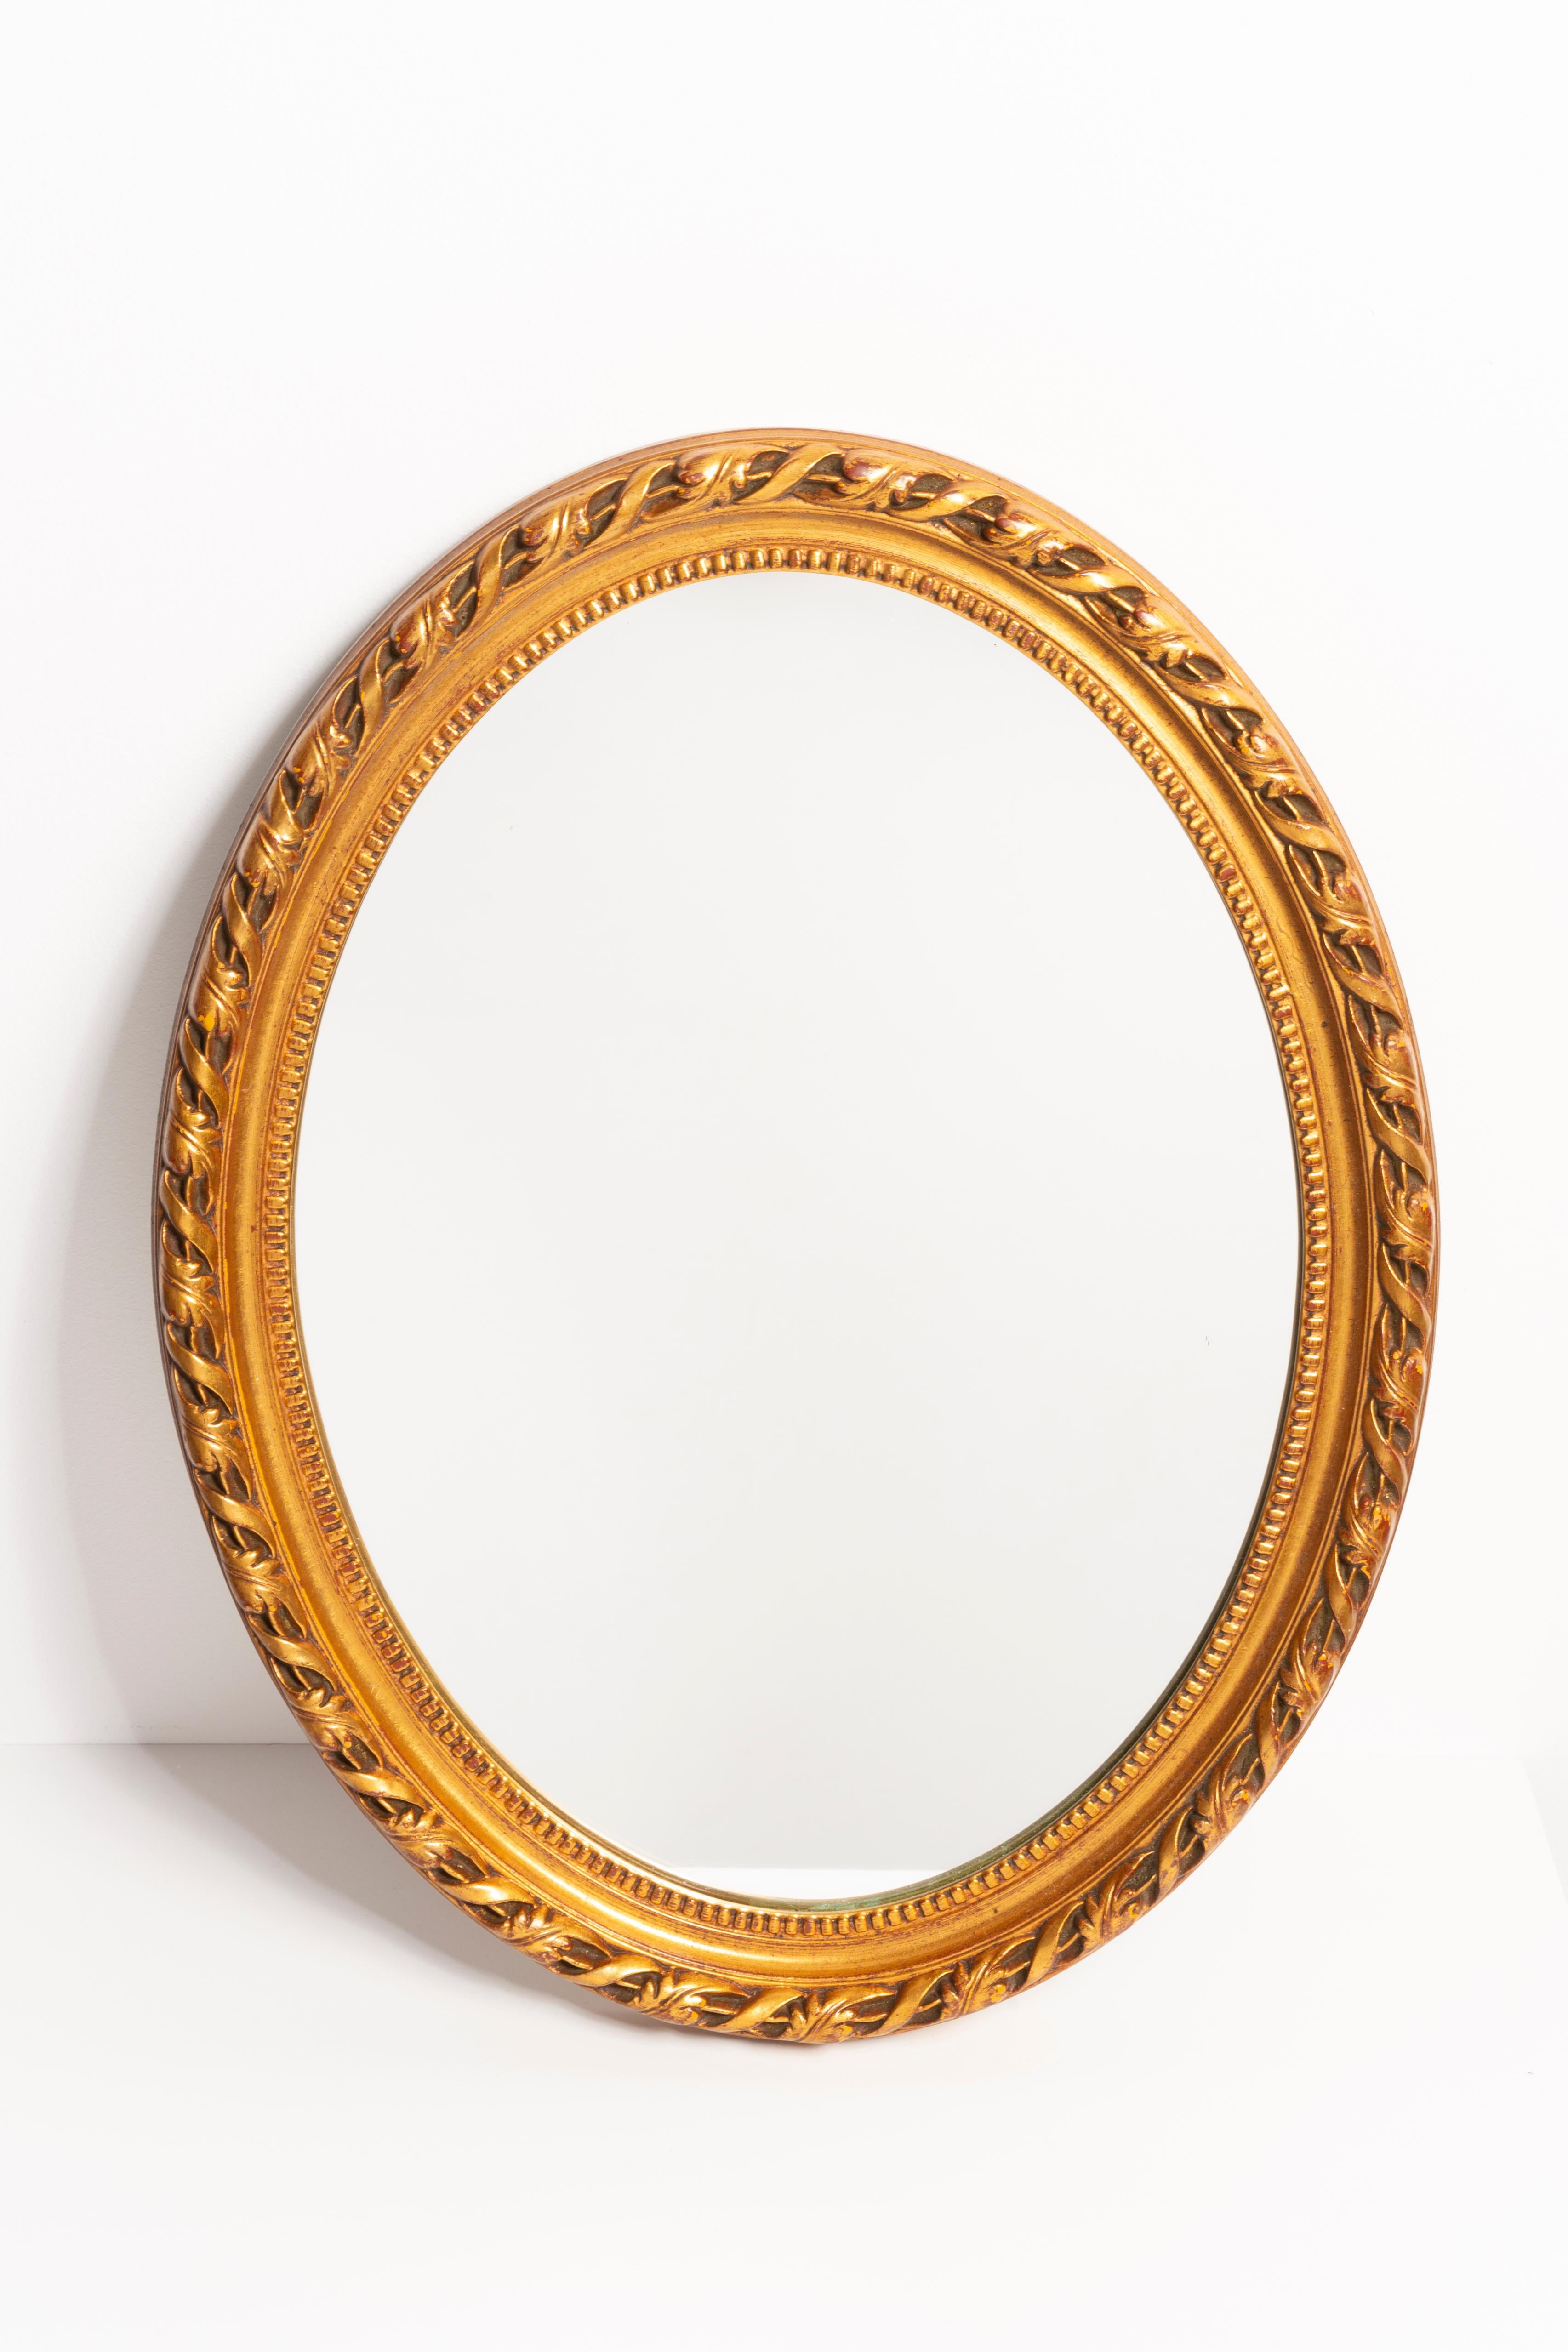 A beautiful oval mirror in a golden decorative frame with flowers from Italy. The frame is made of wood. Mirror is in very good vintage condition, no damage or cracks in the frame. Original glass. Beautiful piece for every interior! Only one unique